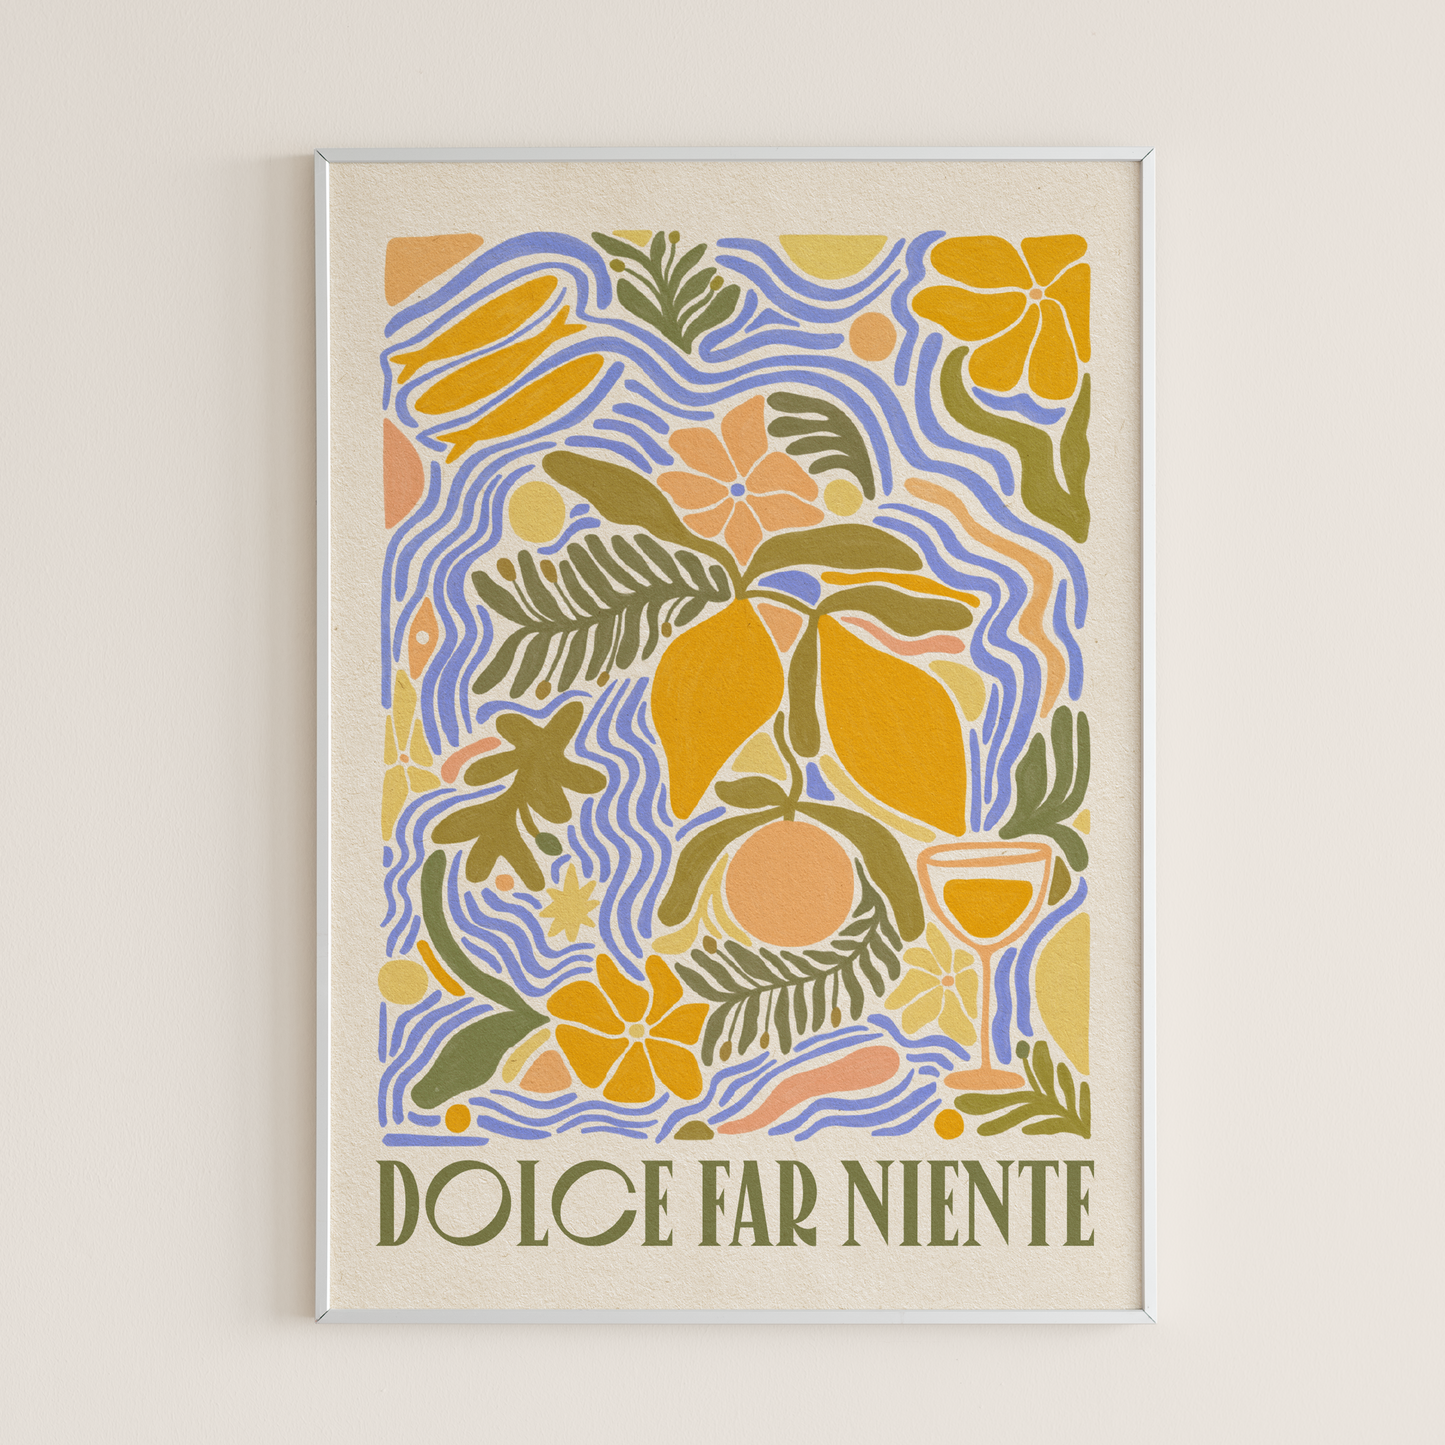 Dolce Far Niente; The Sweetness Of Doing Nothing - Art Print